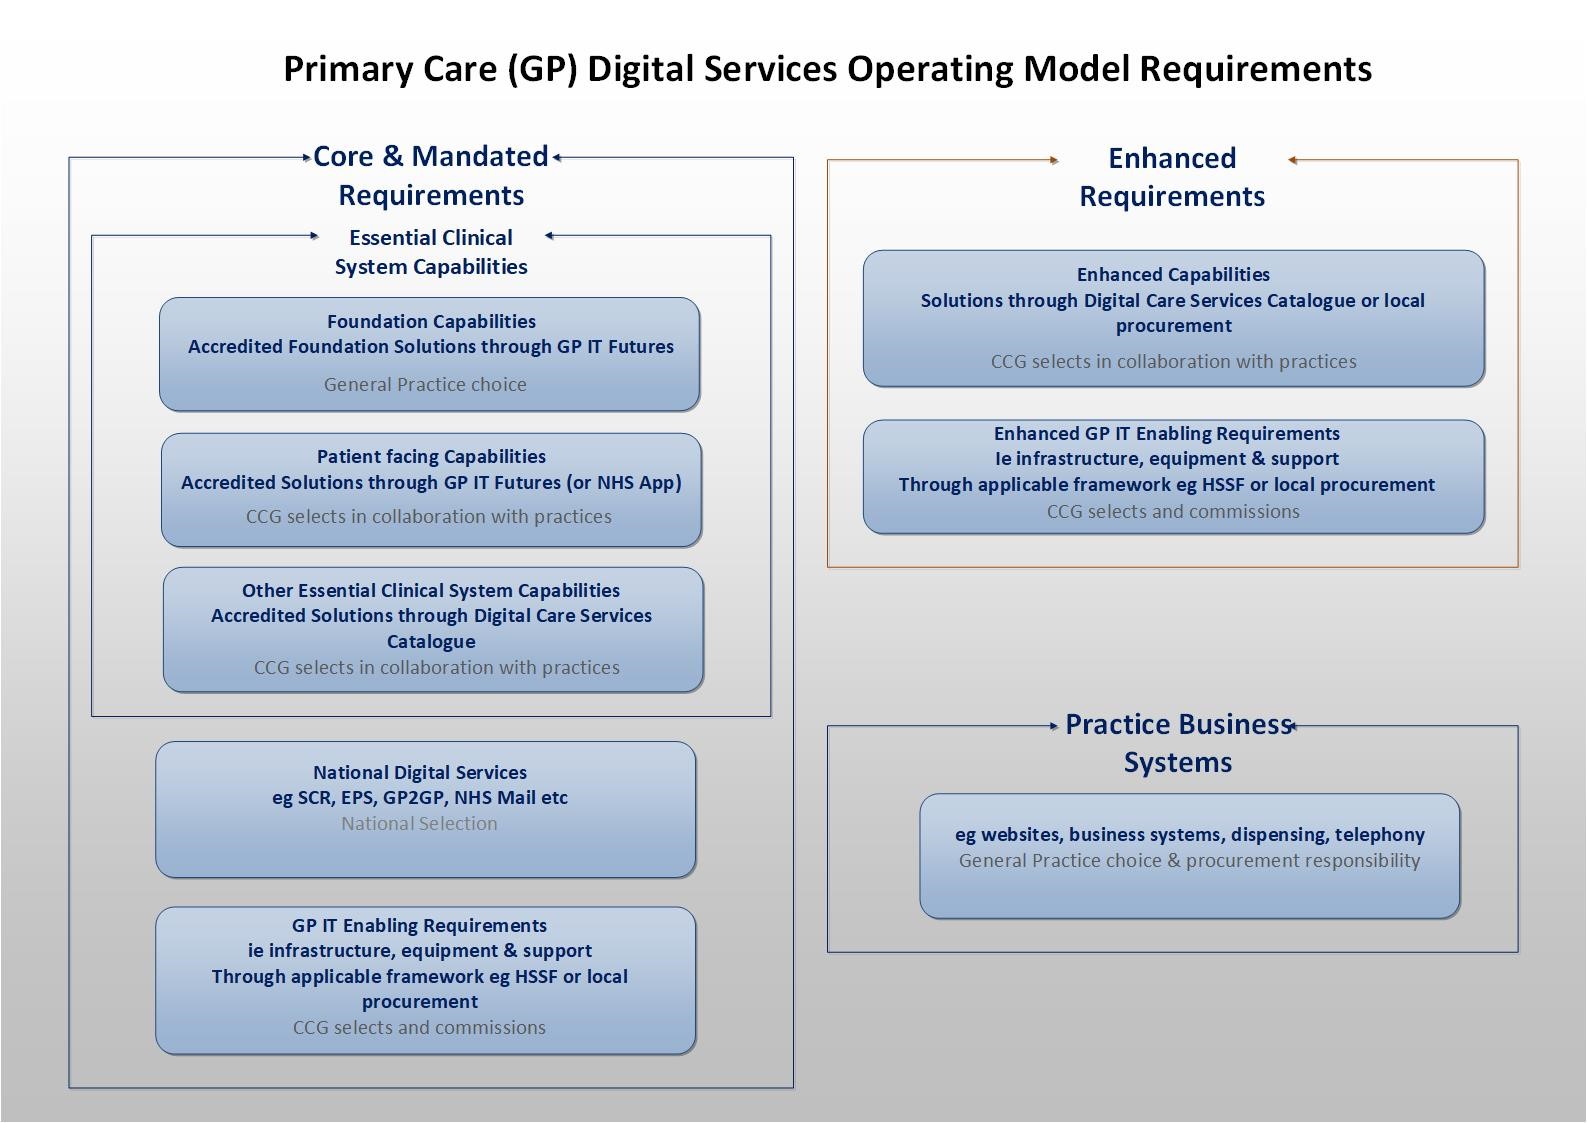 Requirements and capabilities under this Operating Model.